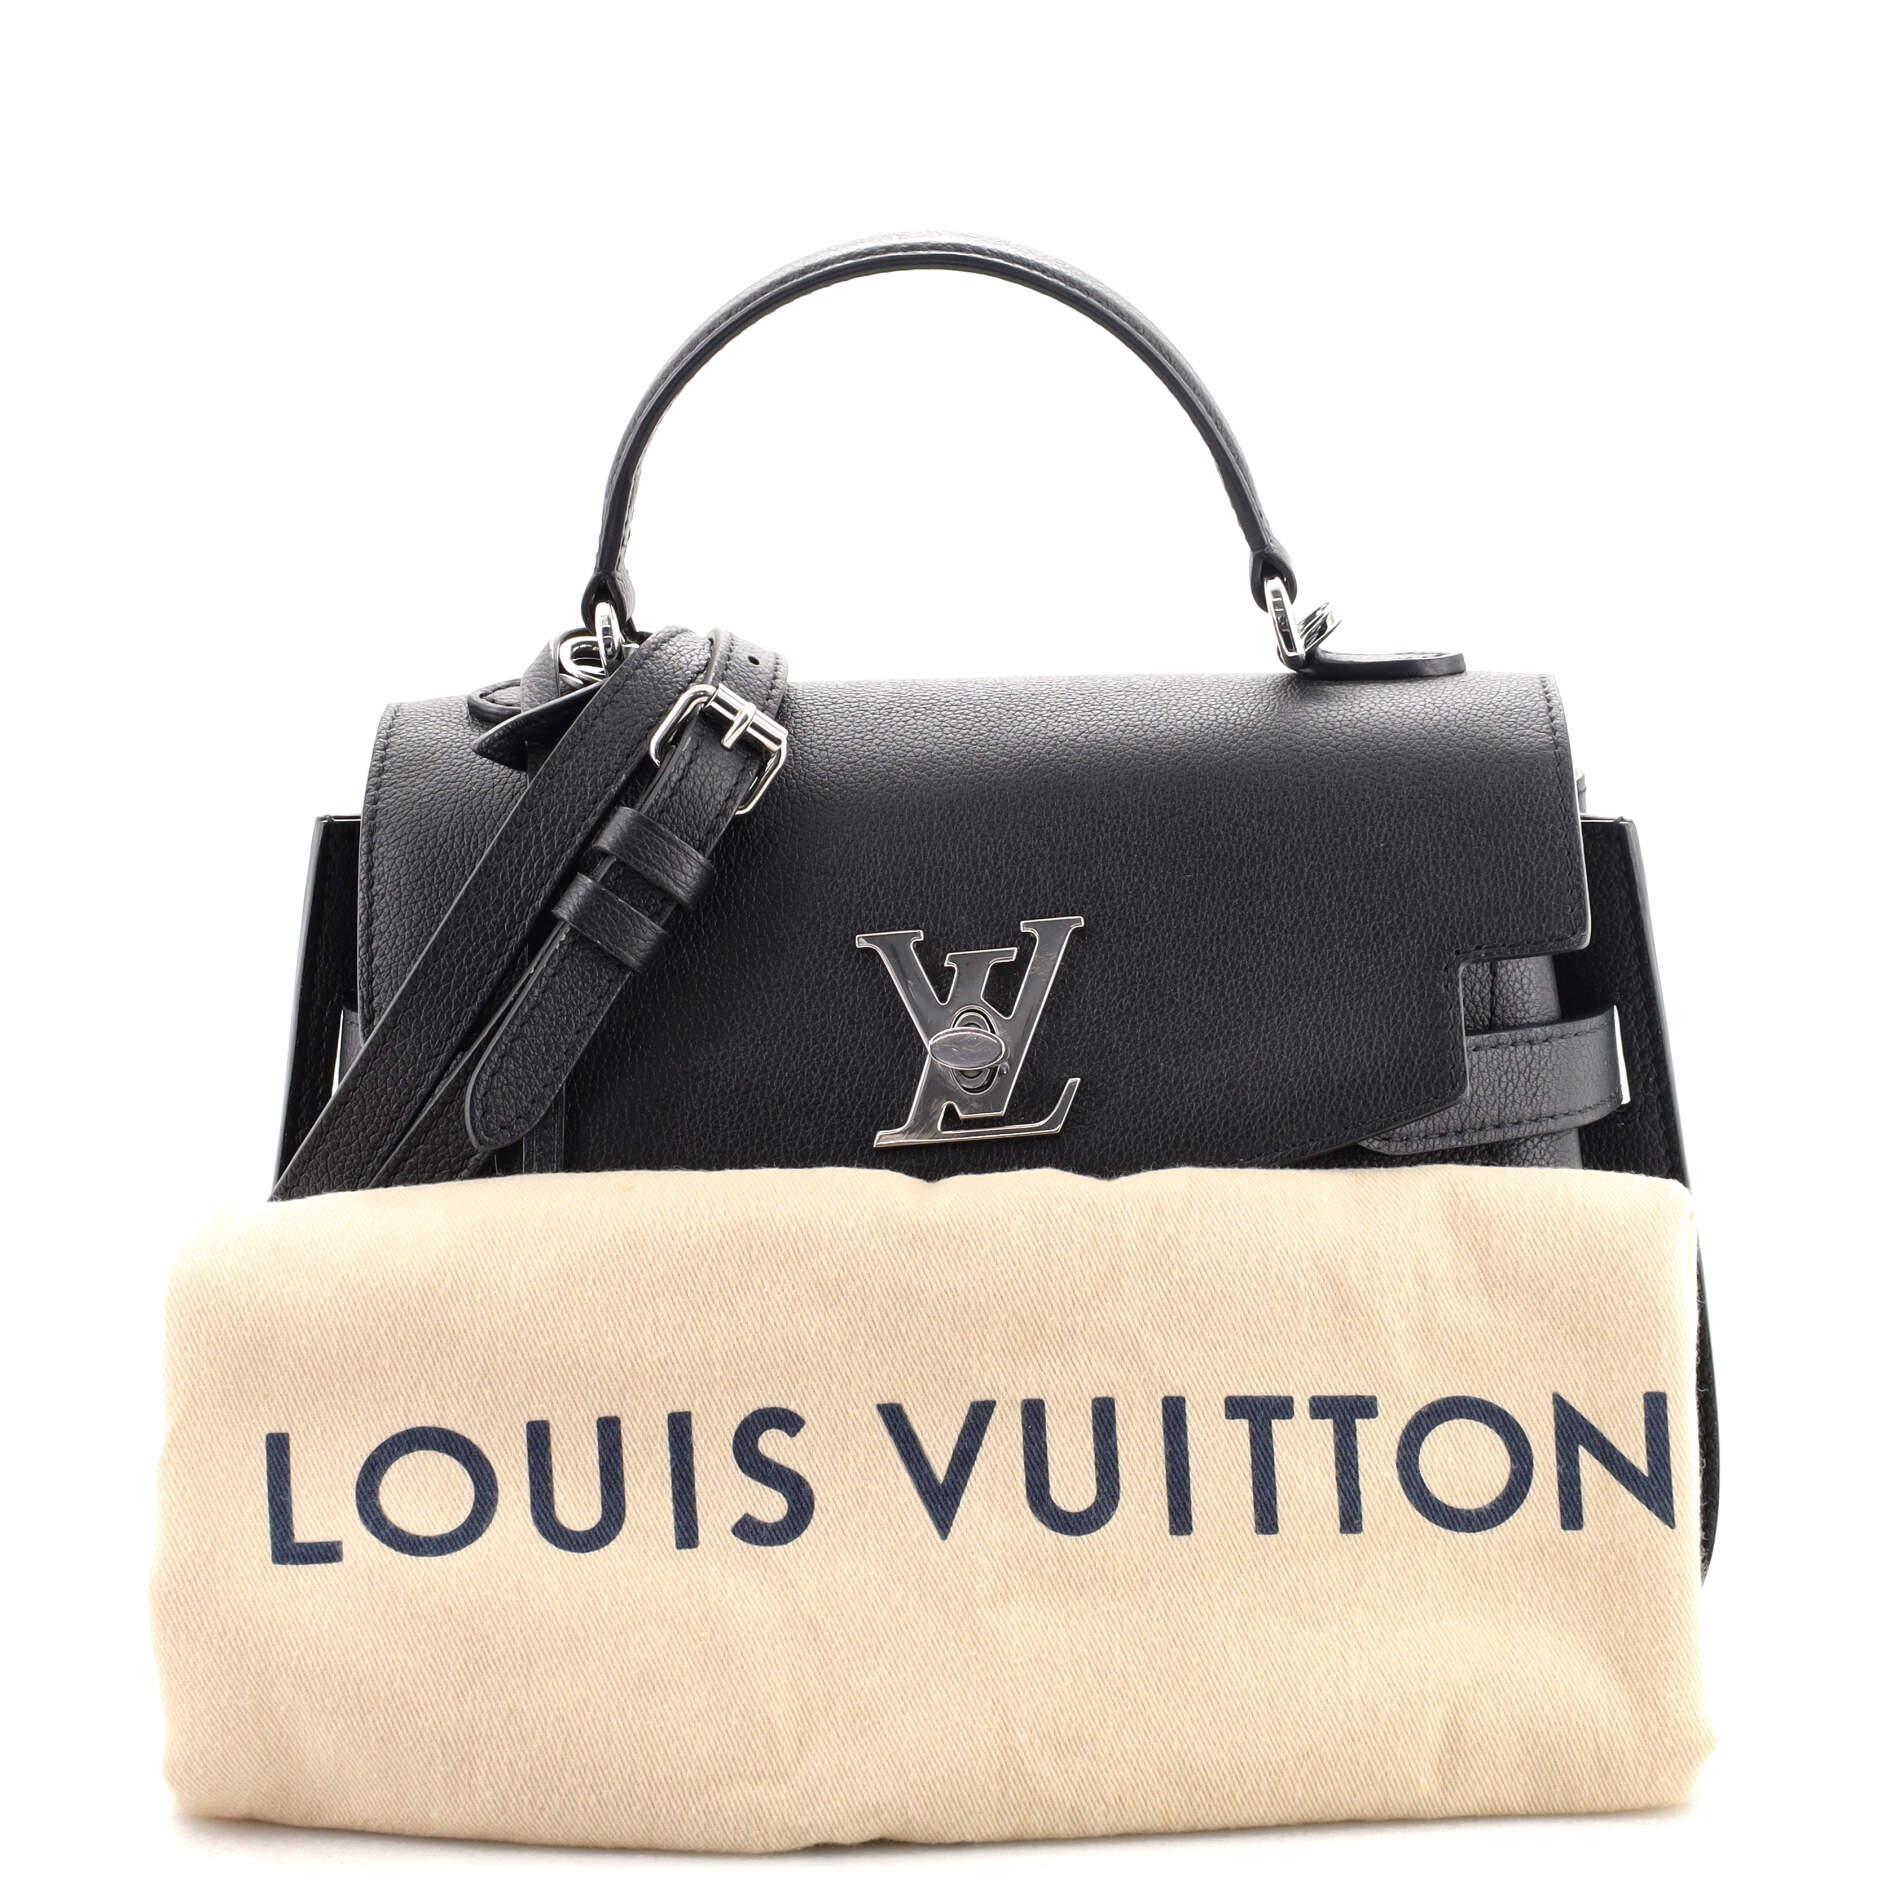 Louis Vuitton Lockme Ever Bb - For Sale on 1stDibs  lv lockme bb, louis  vuitton lockme bb, lock me ever bb